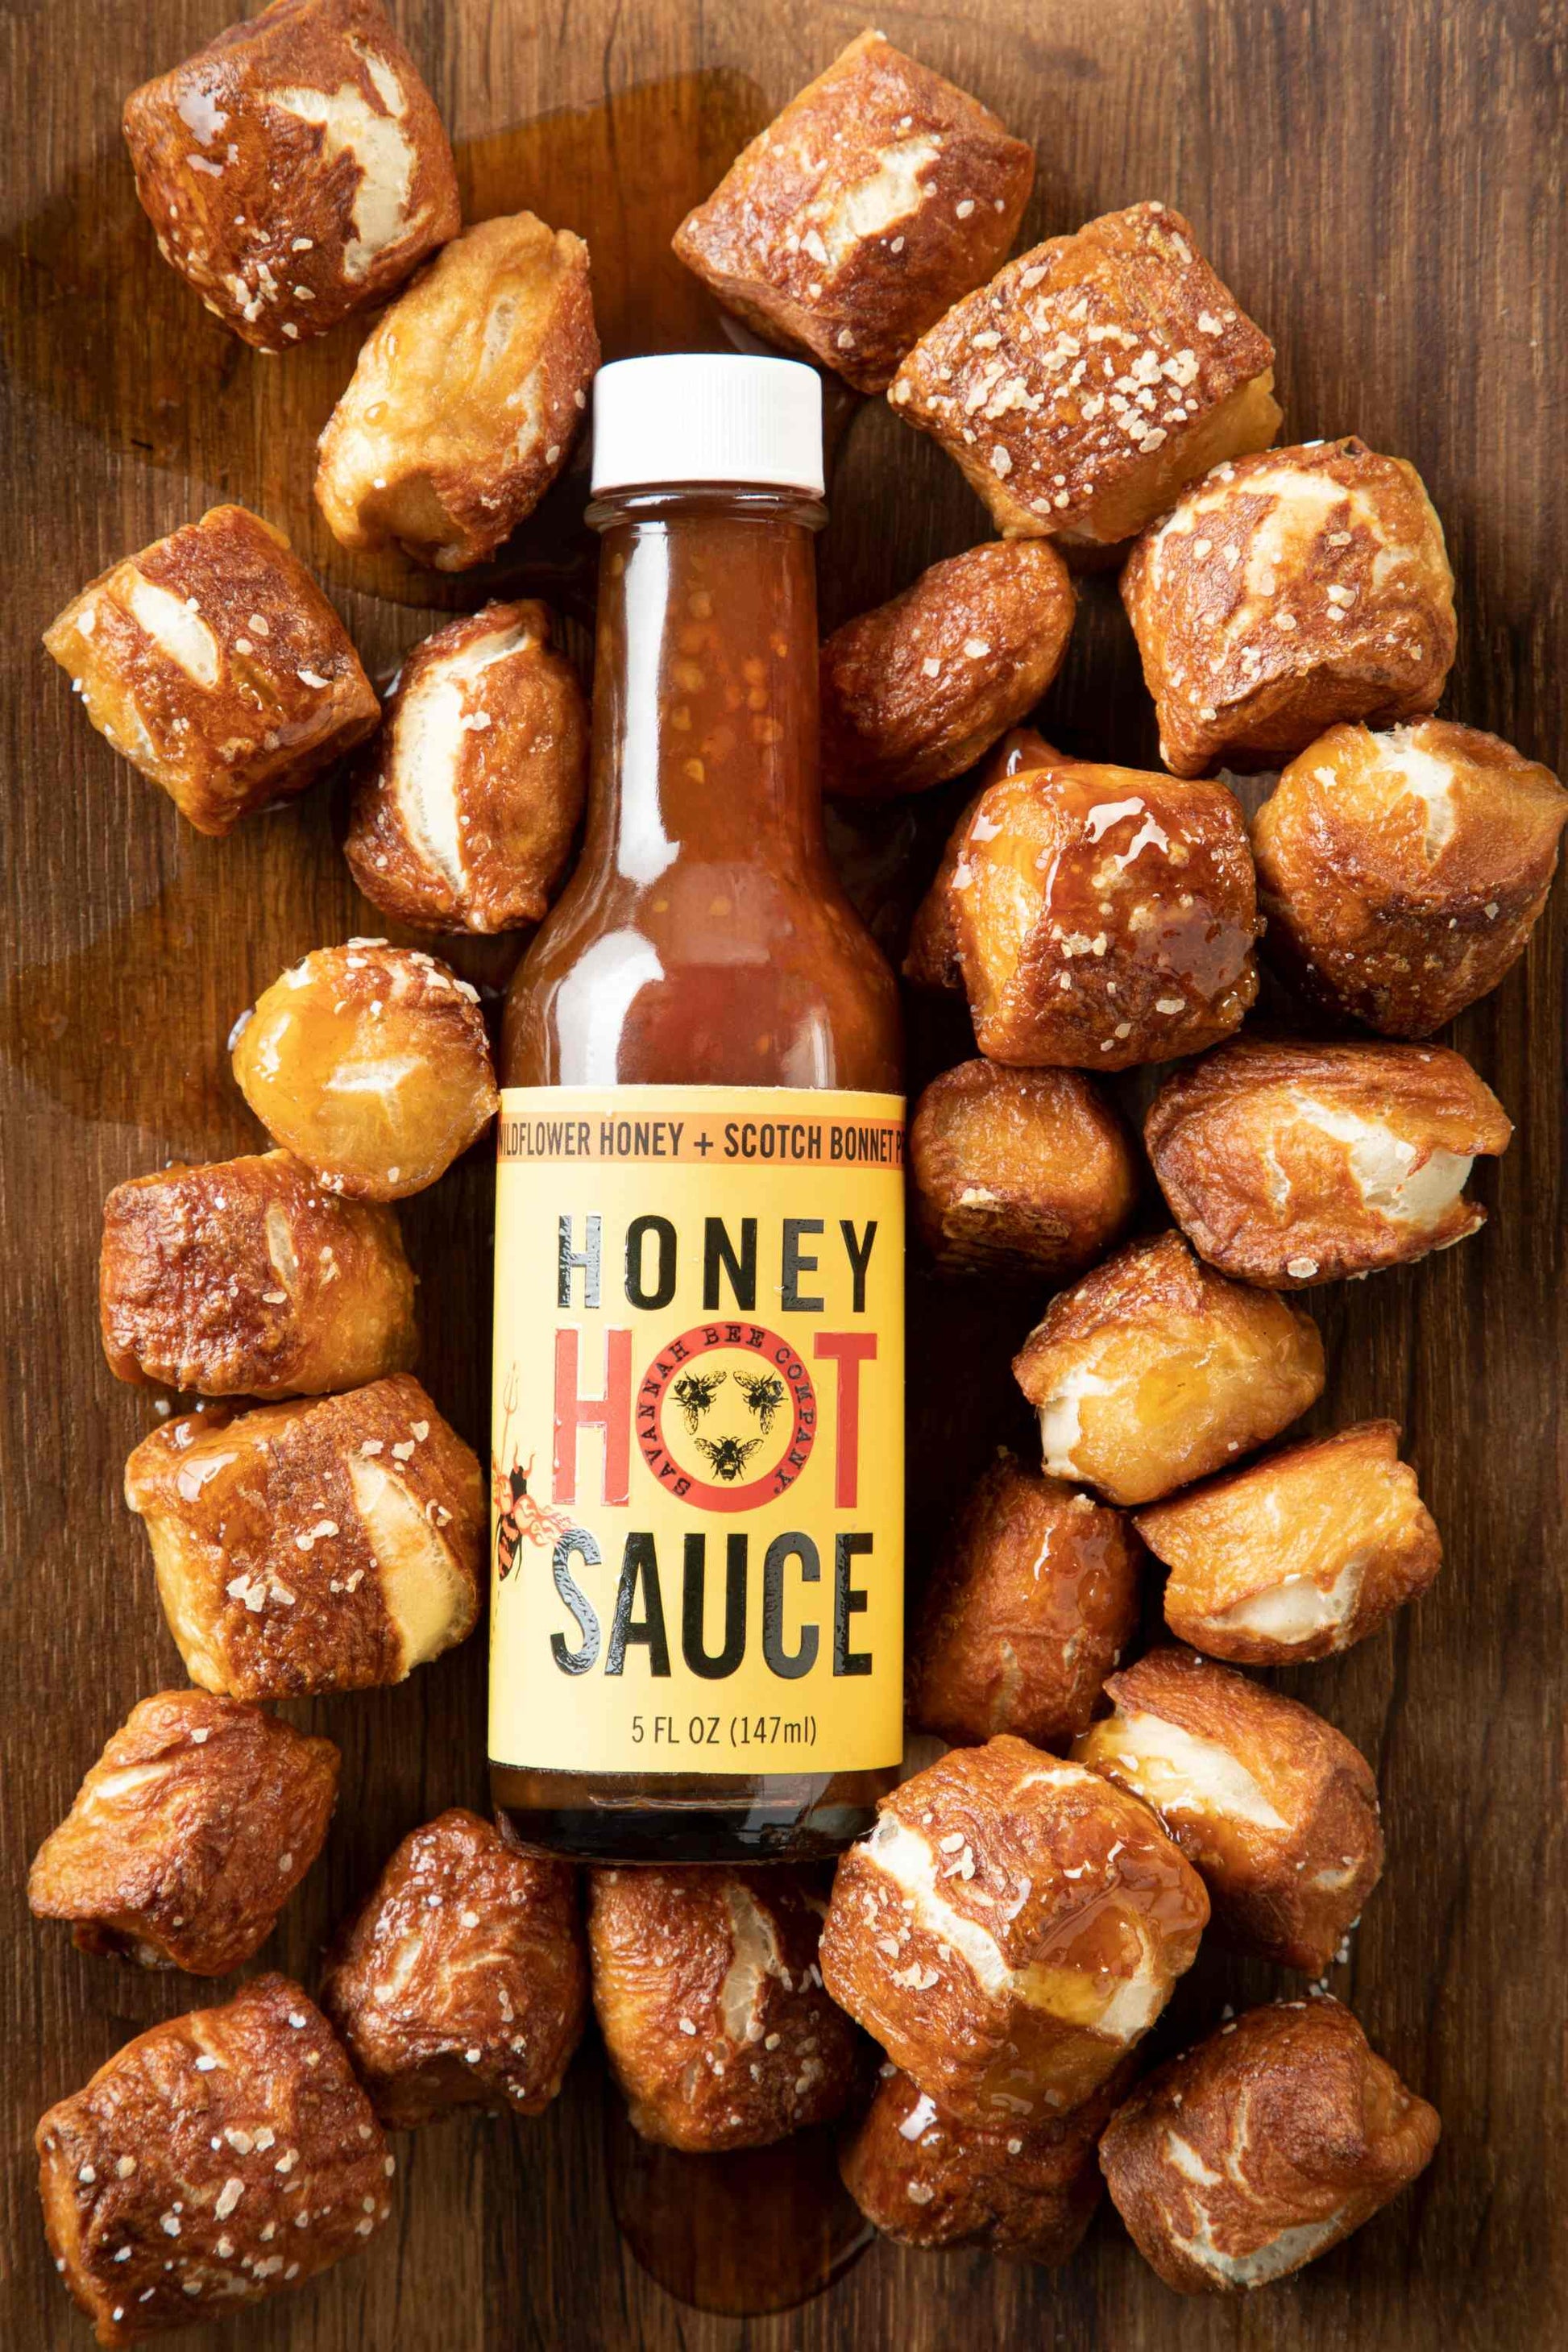 Honey hot sauce surrounded by pretzel bites on a table